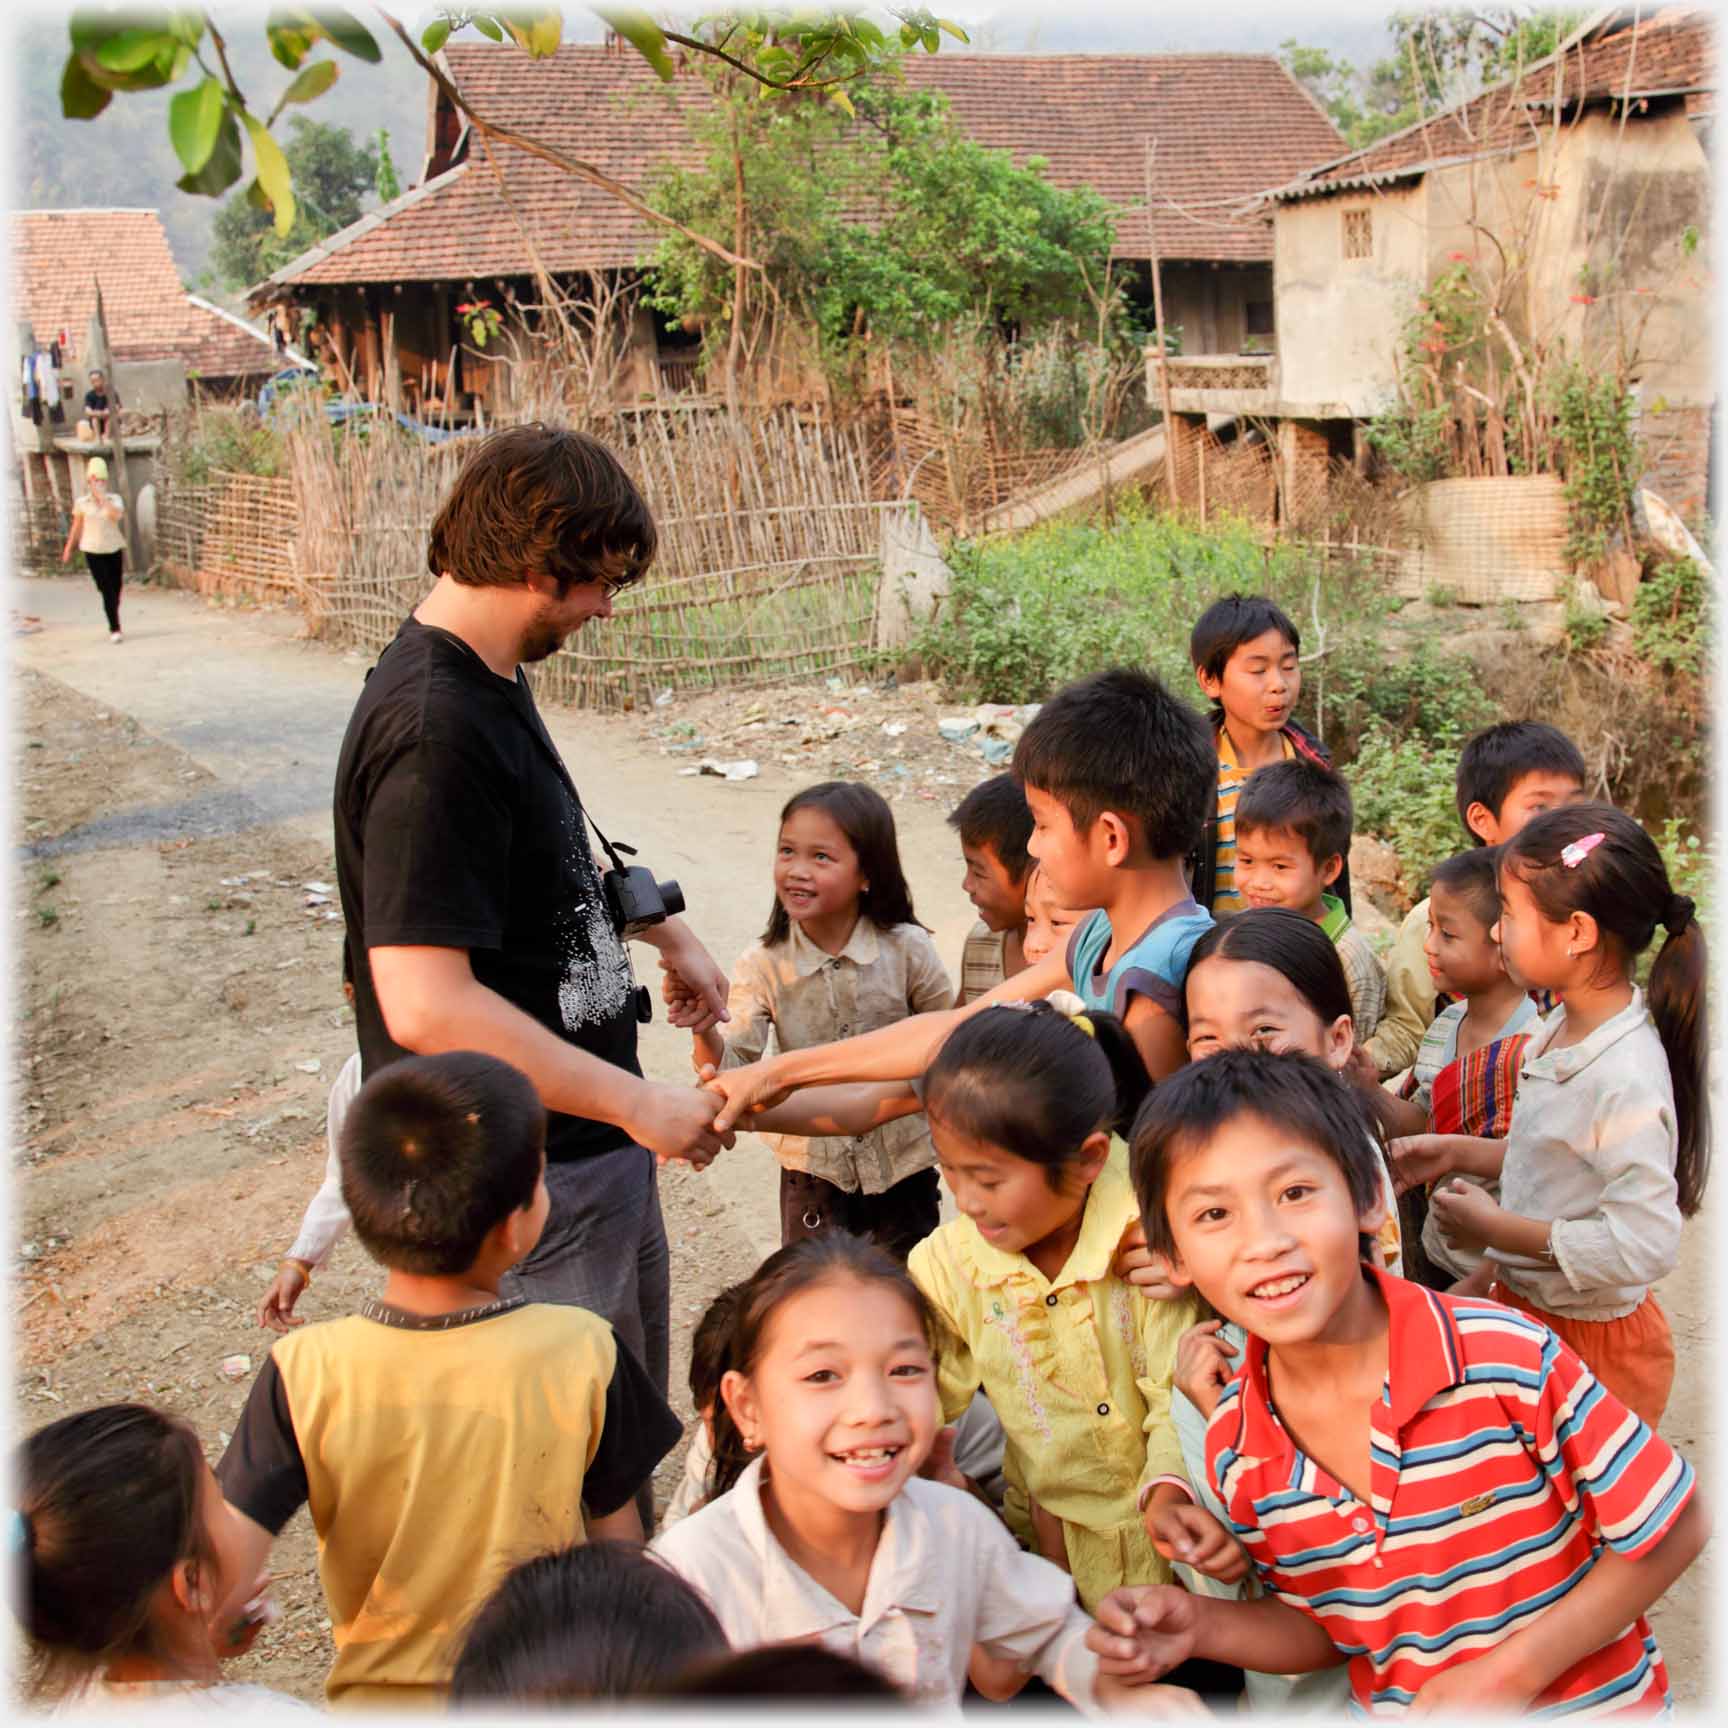 Western man shaking hands with a group of children.